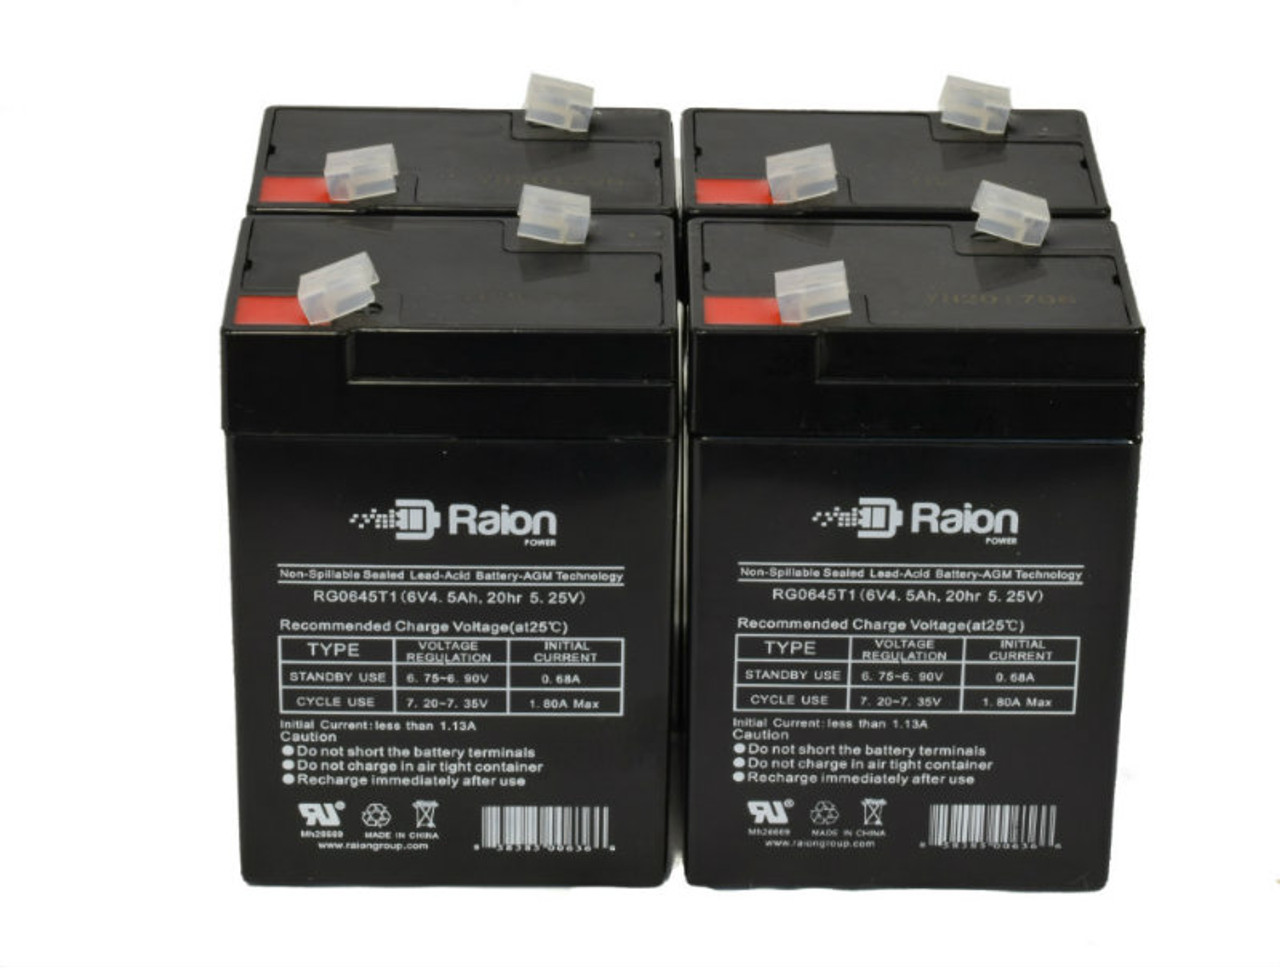 Raion Power 6V 4.5Ah Replacement Emergency Light Battery for Para Systems S65 - 4 Pack